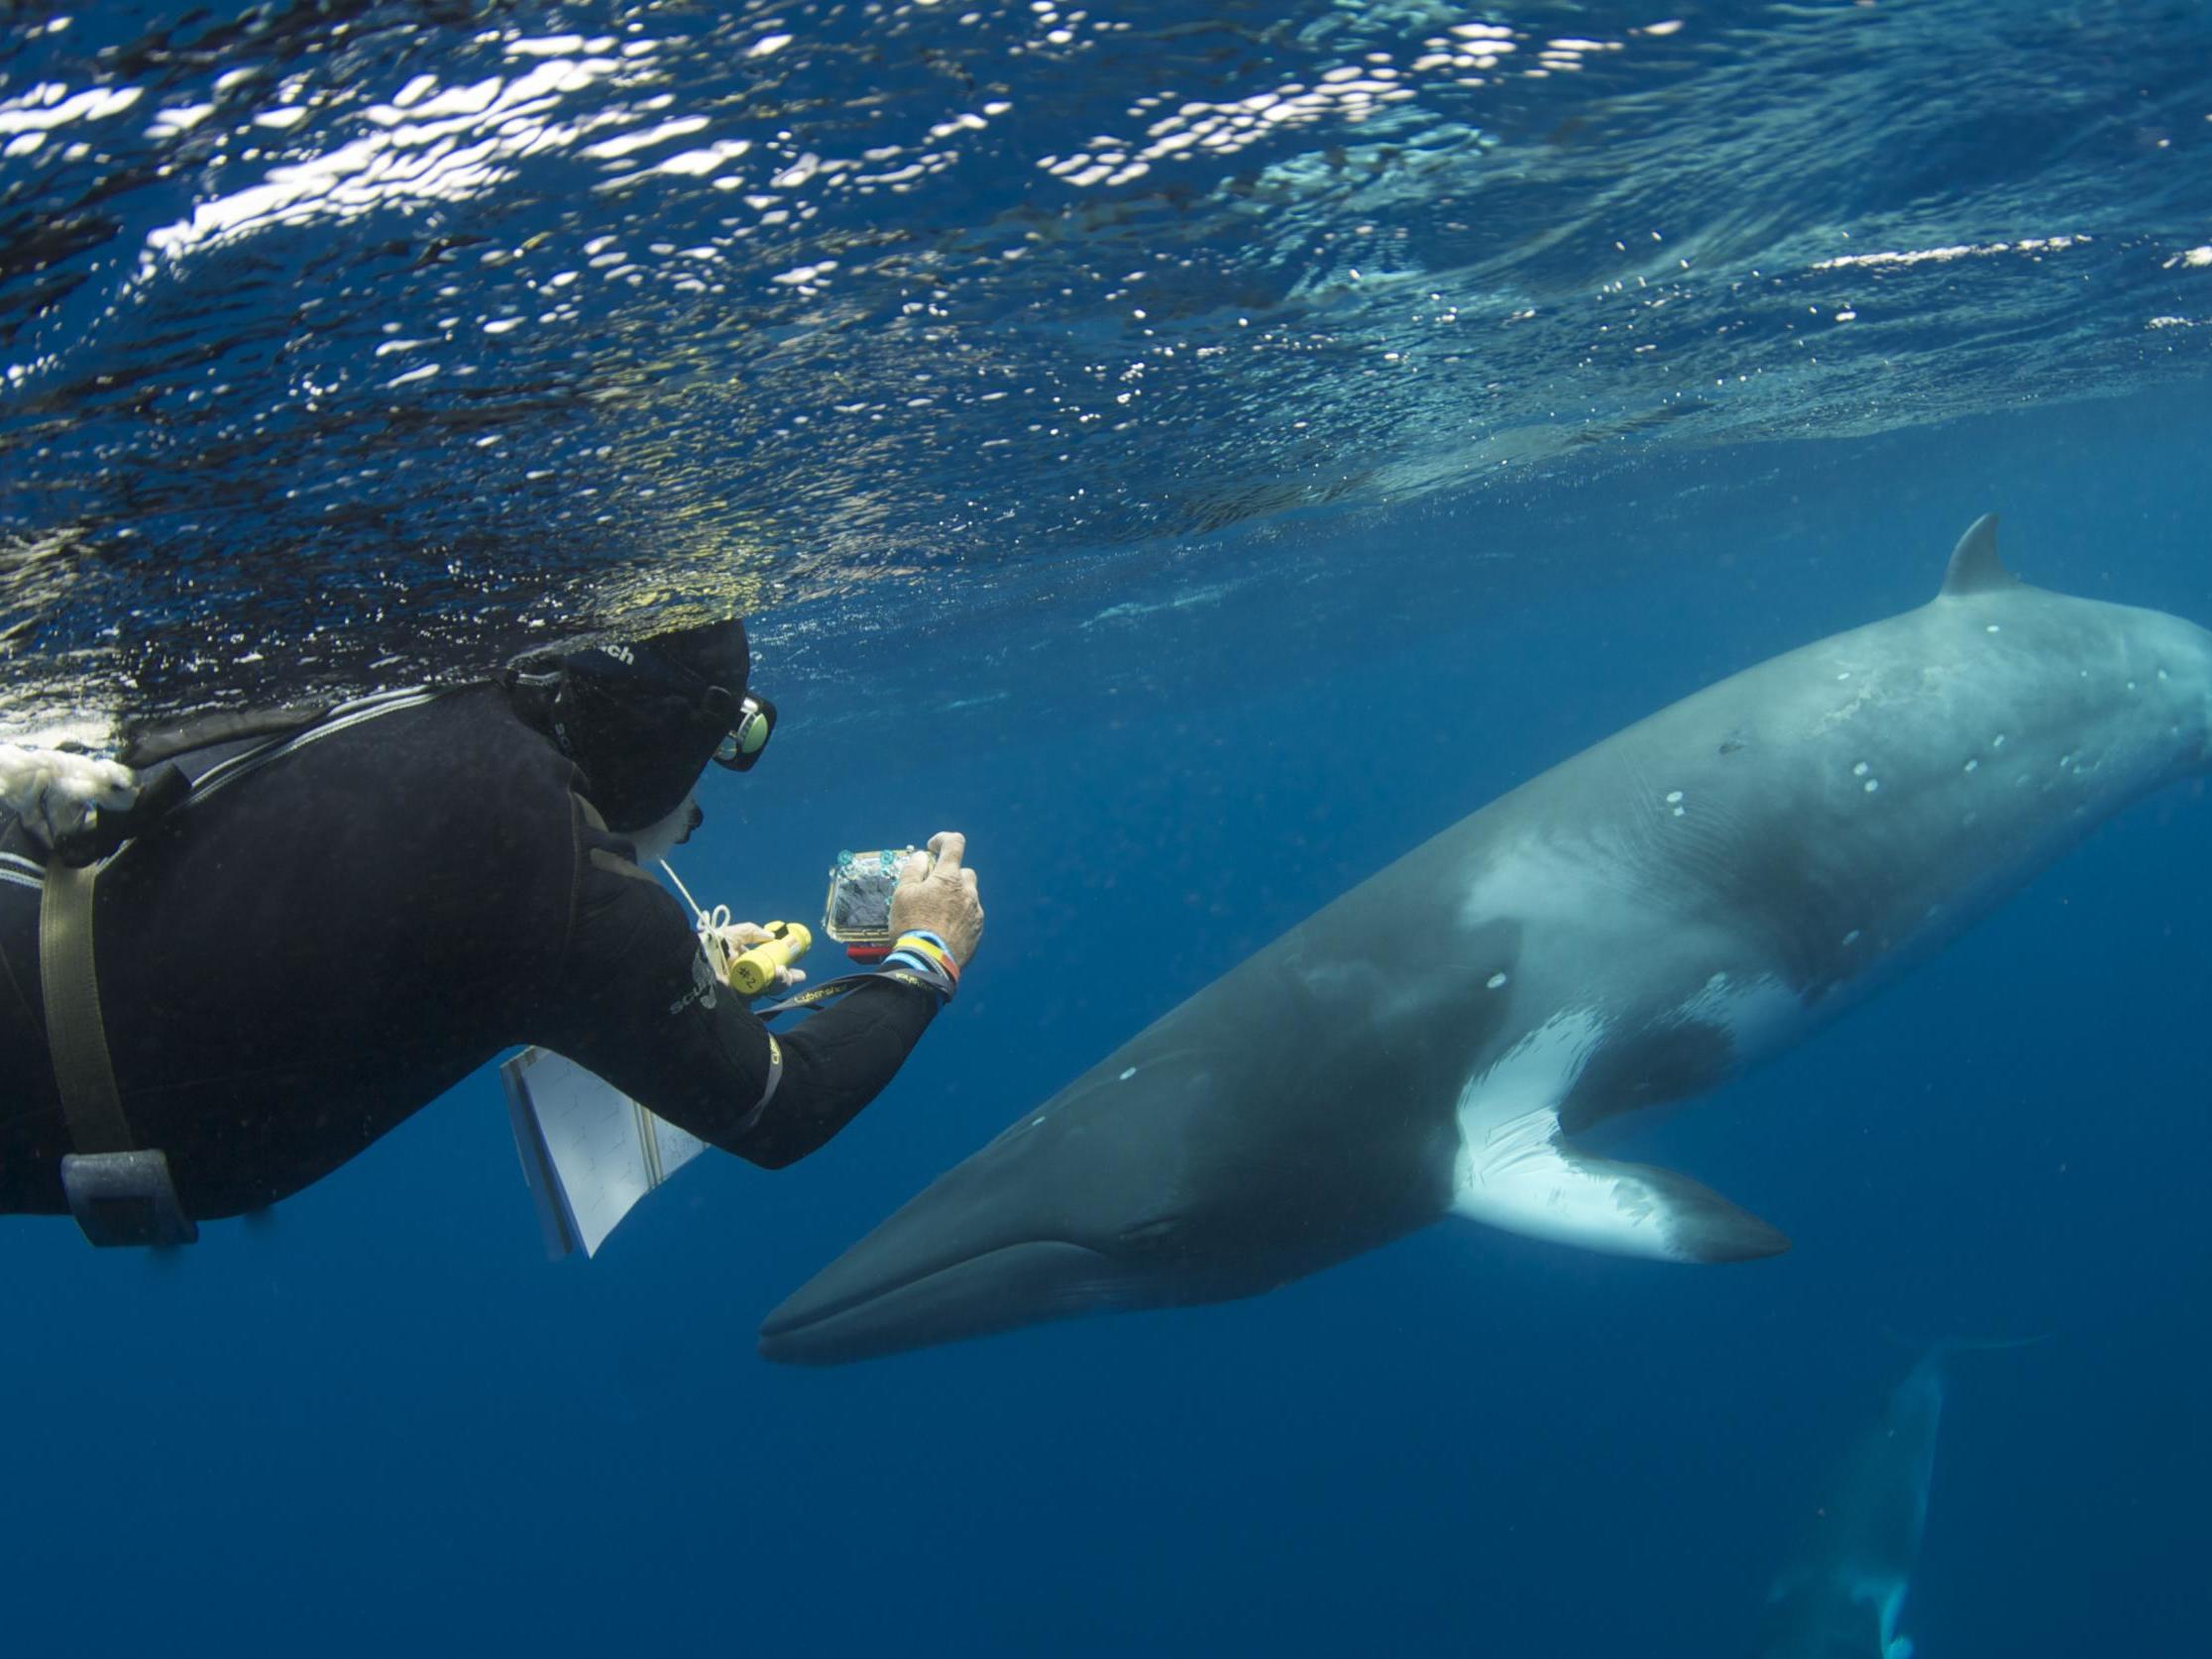 A diver gets close to a dwarf minke whale; such encounters leave young vulnerable, say conservationists